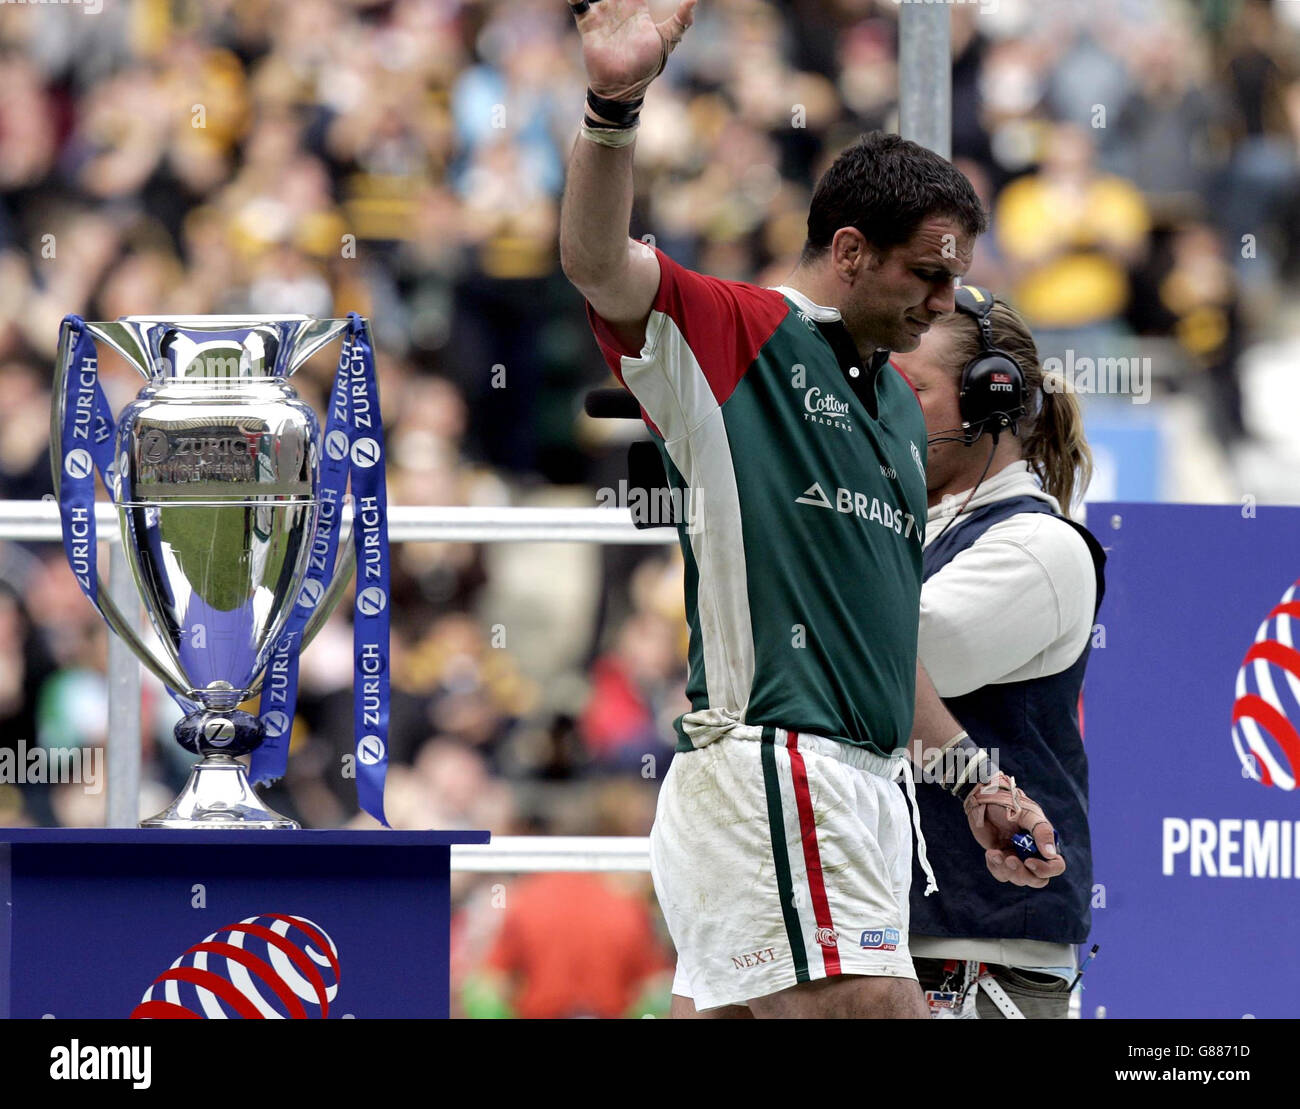 Rugby Union - Zurich Premiership Final - Wasps v Leicester - Twickenham. Leicester Tigers Martin Johnson waves to his team and fans in his final game. Stock Photo